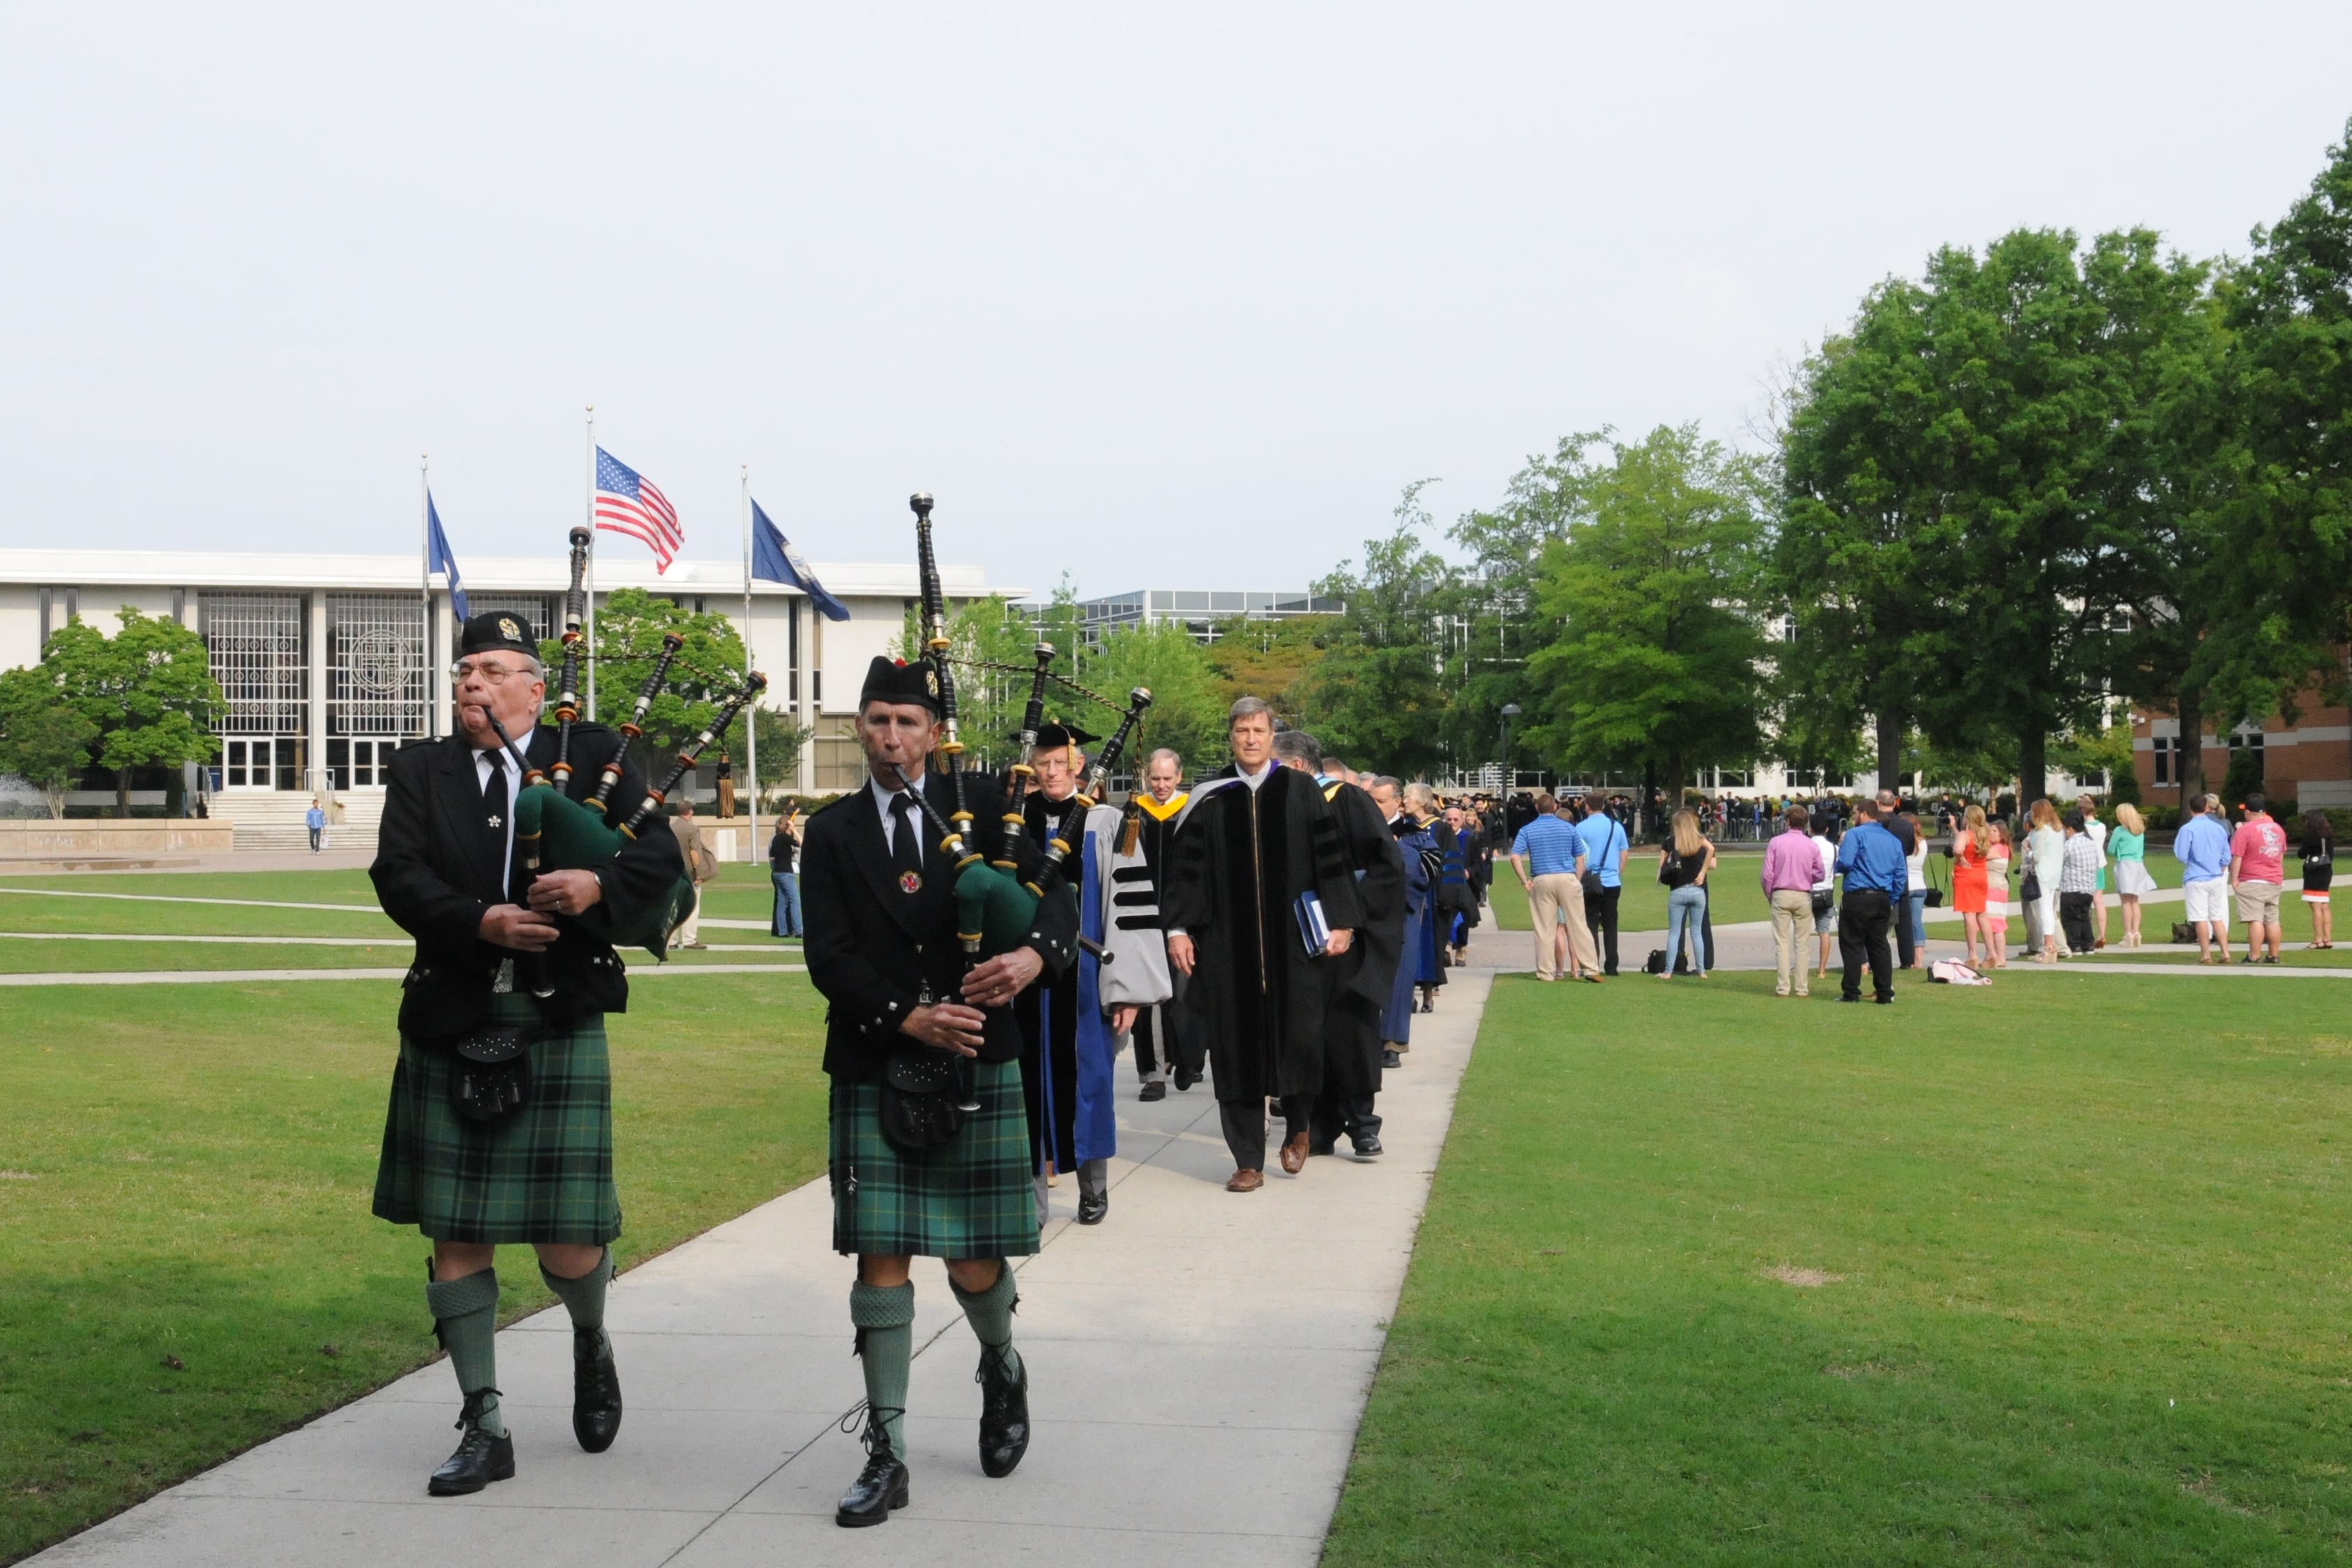 The academic processional walks down Kaufman Mall during spring commencement 2013